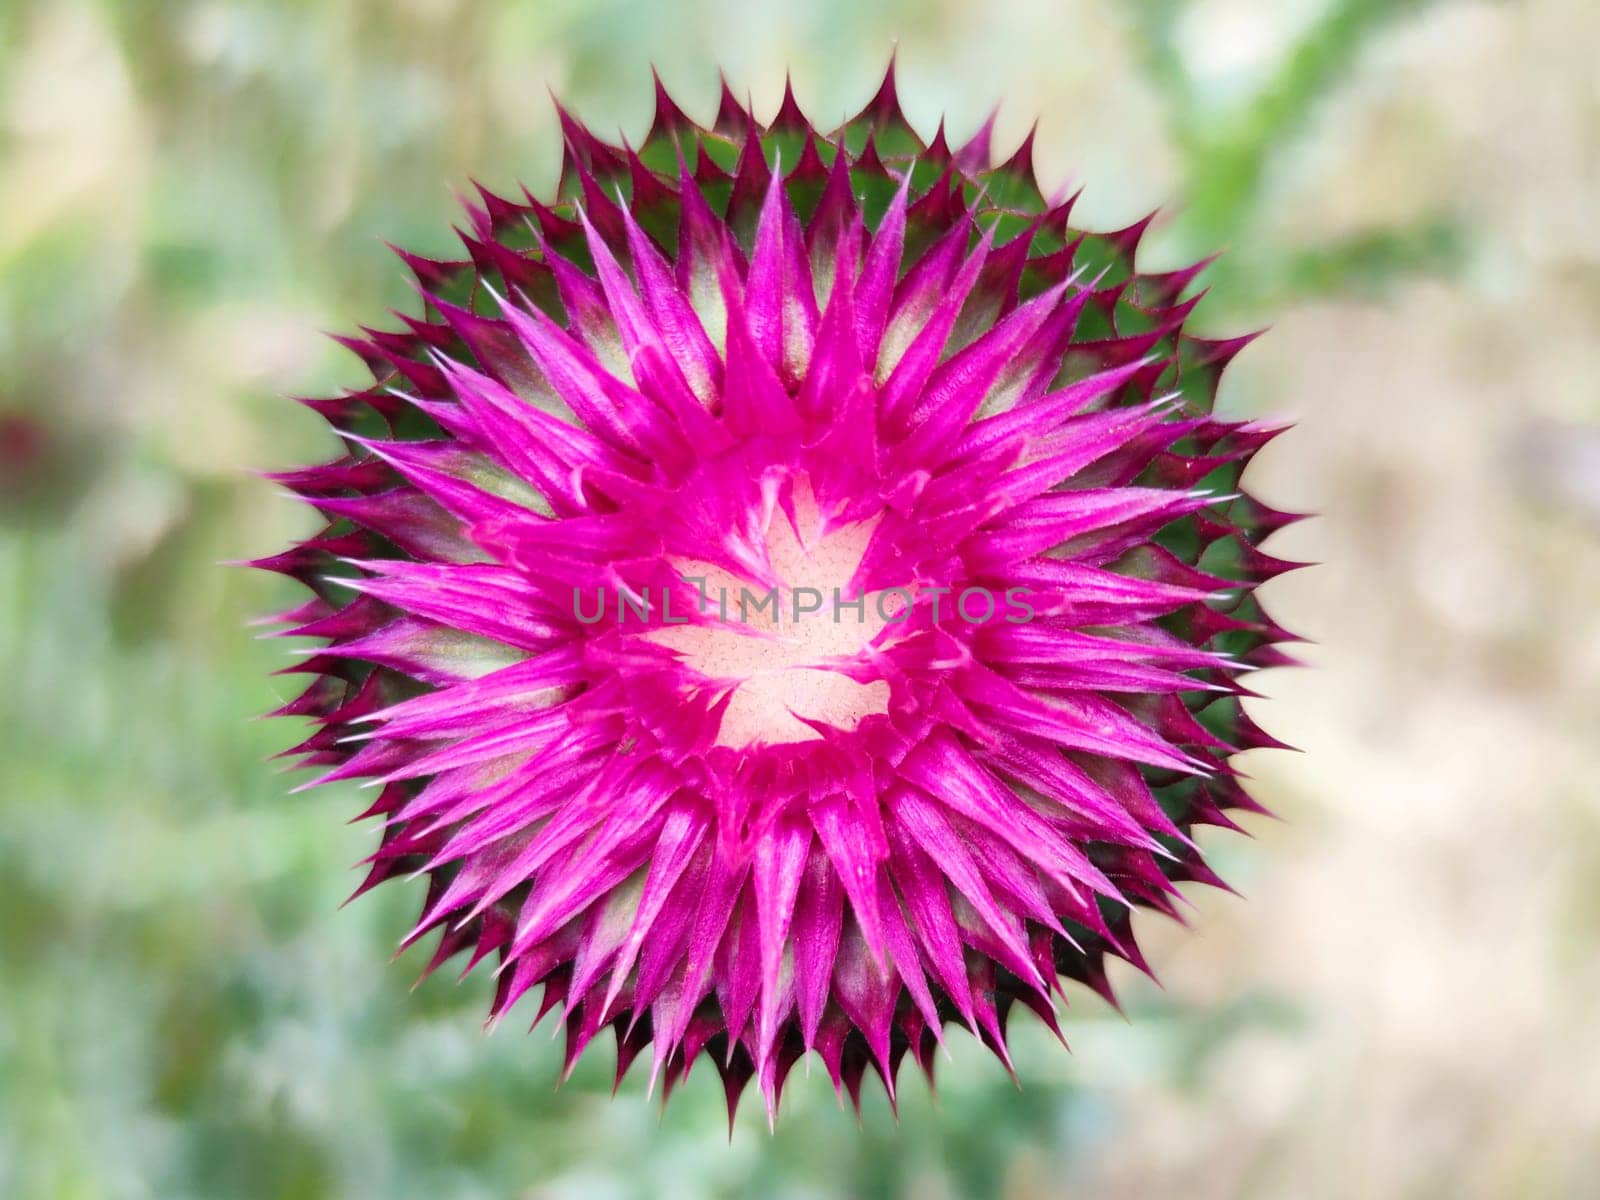 pink thistle flower Silybum closeup for abstract geometric background by Annado